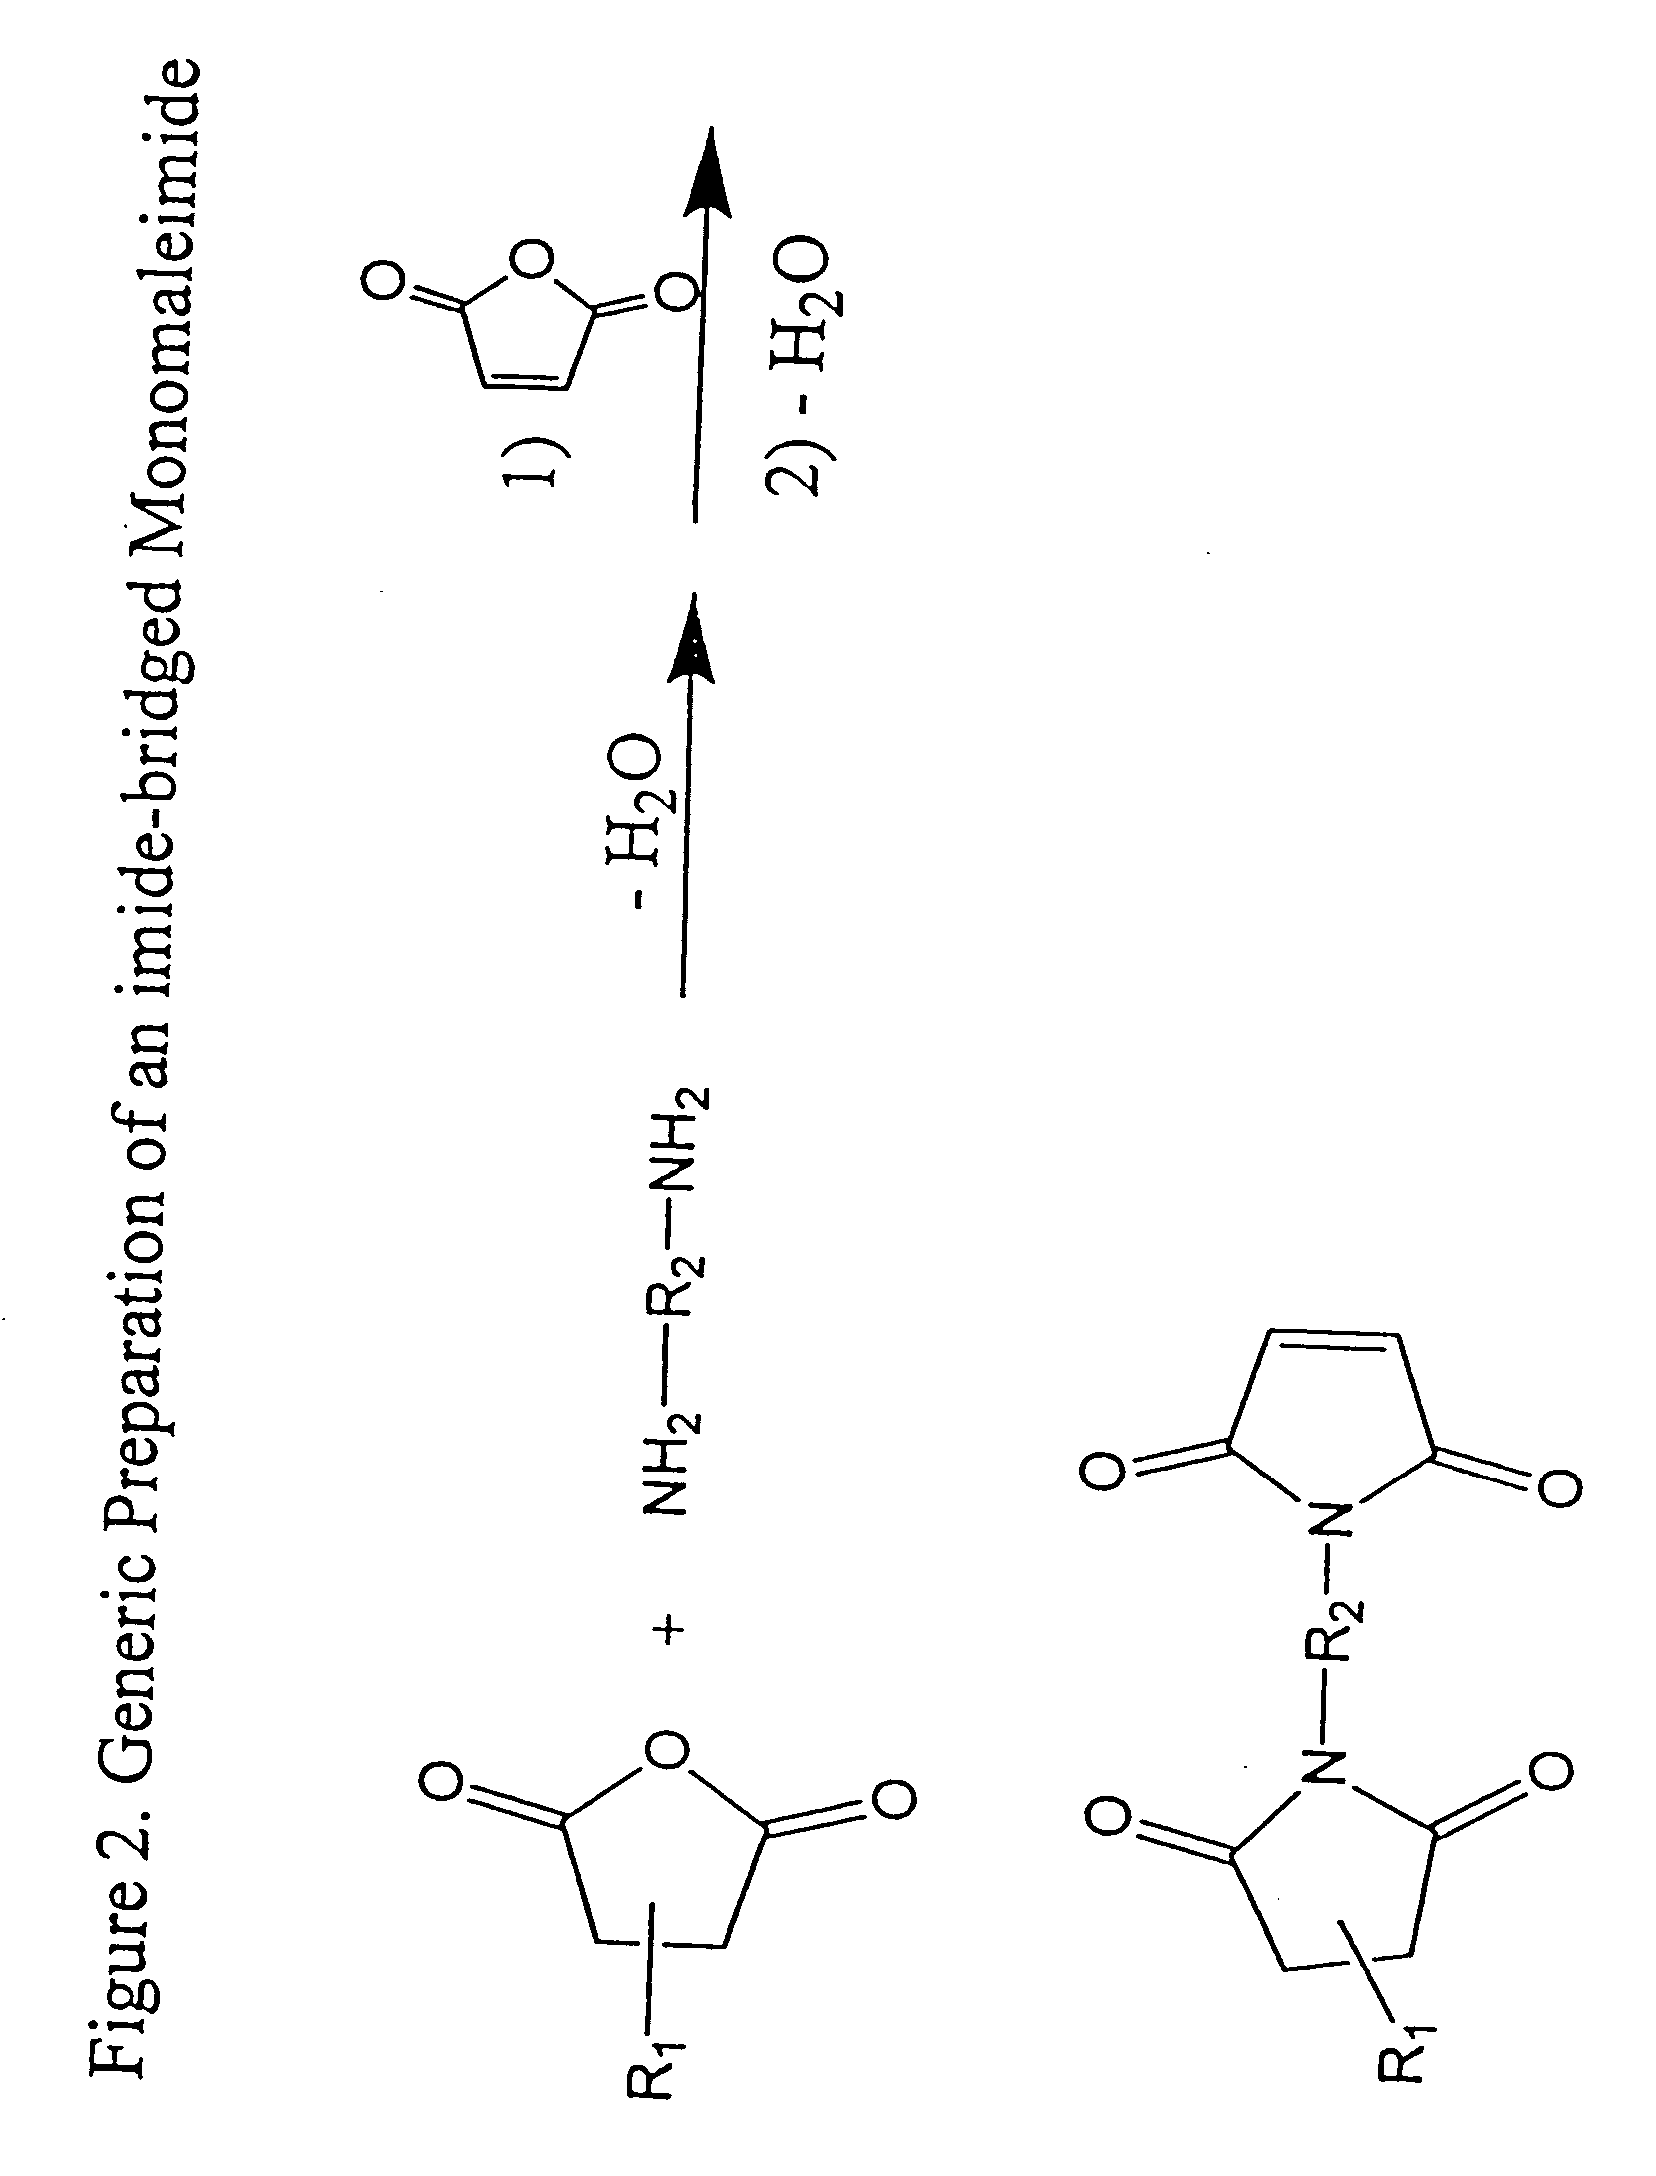 Imide-linked maleimide and polymaleimide compounds